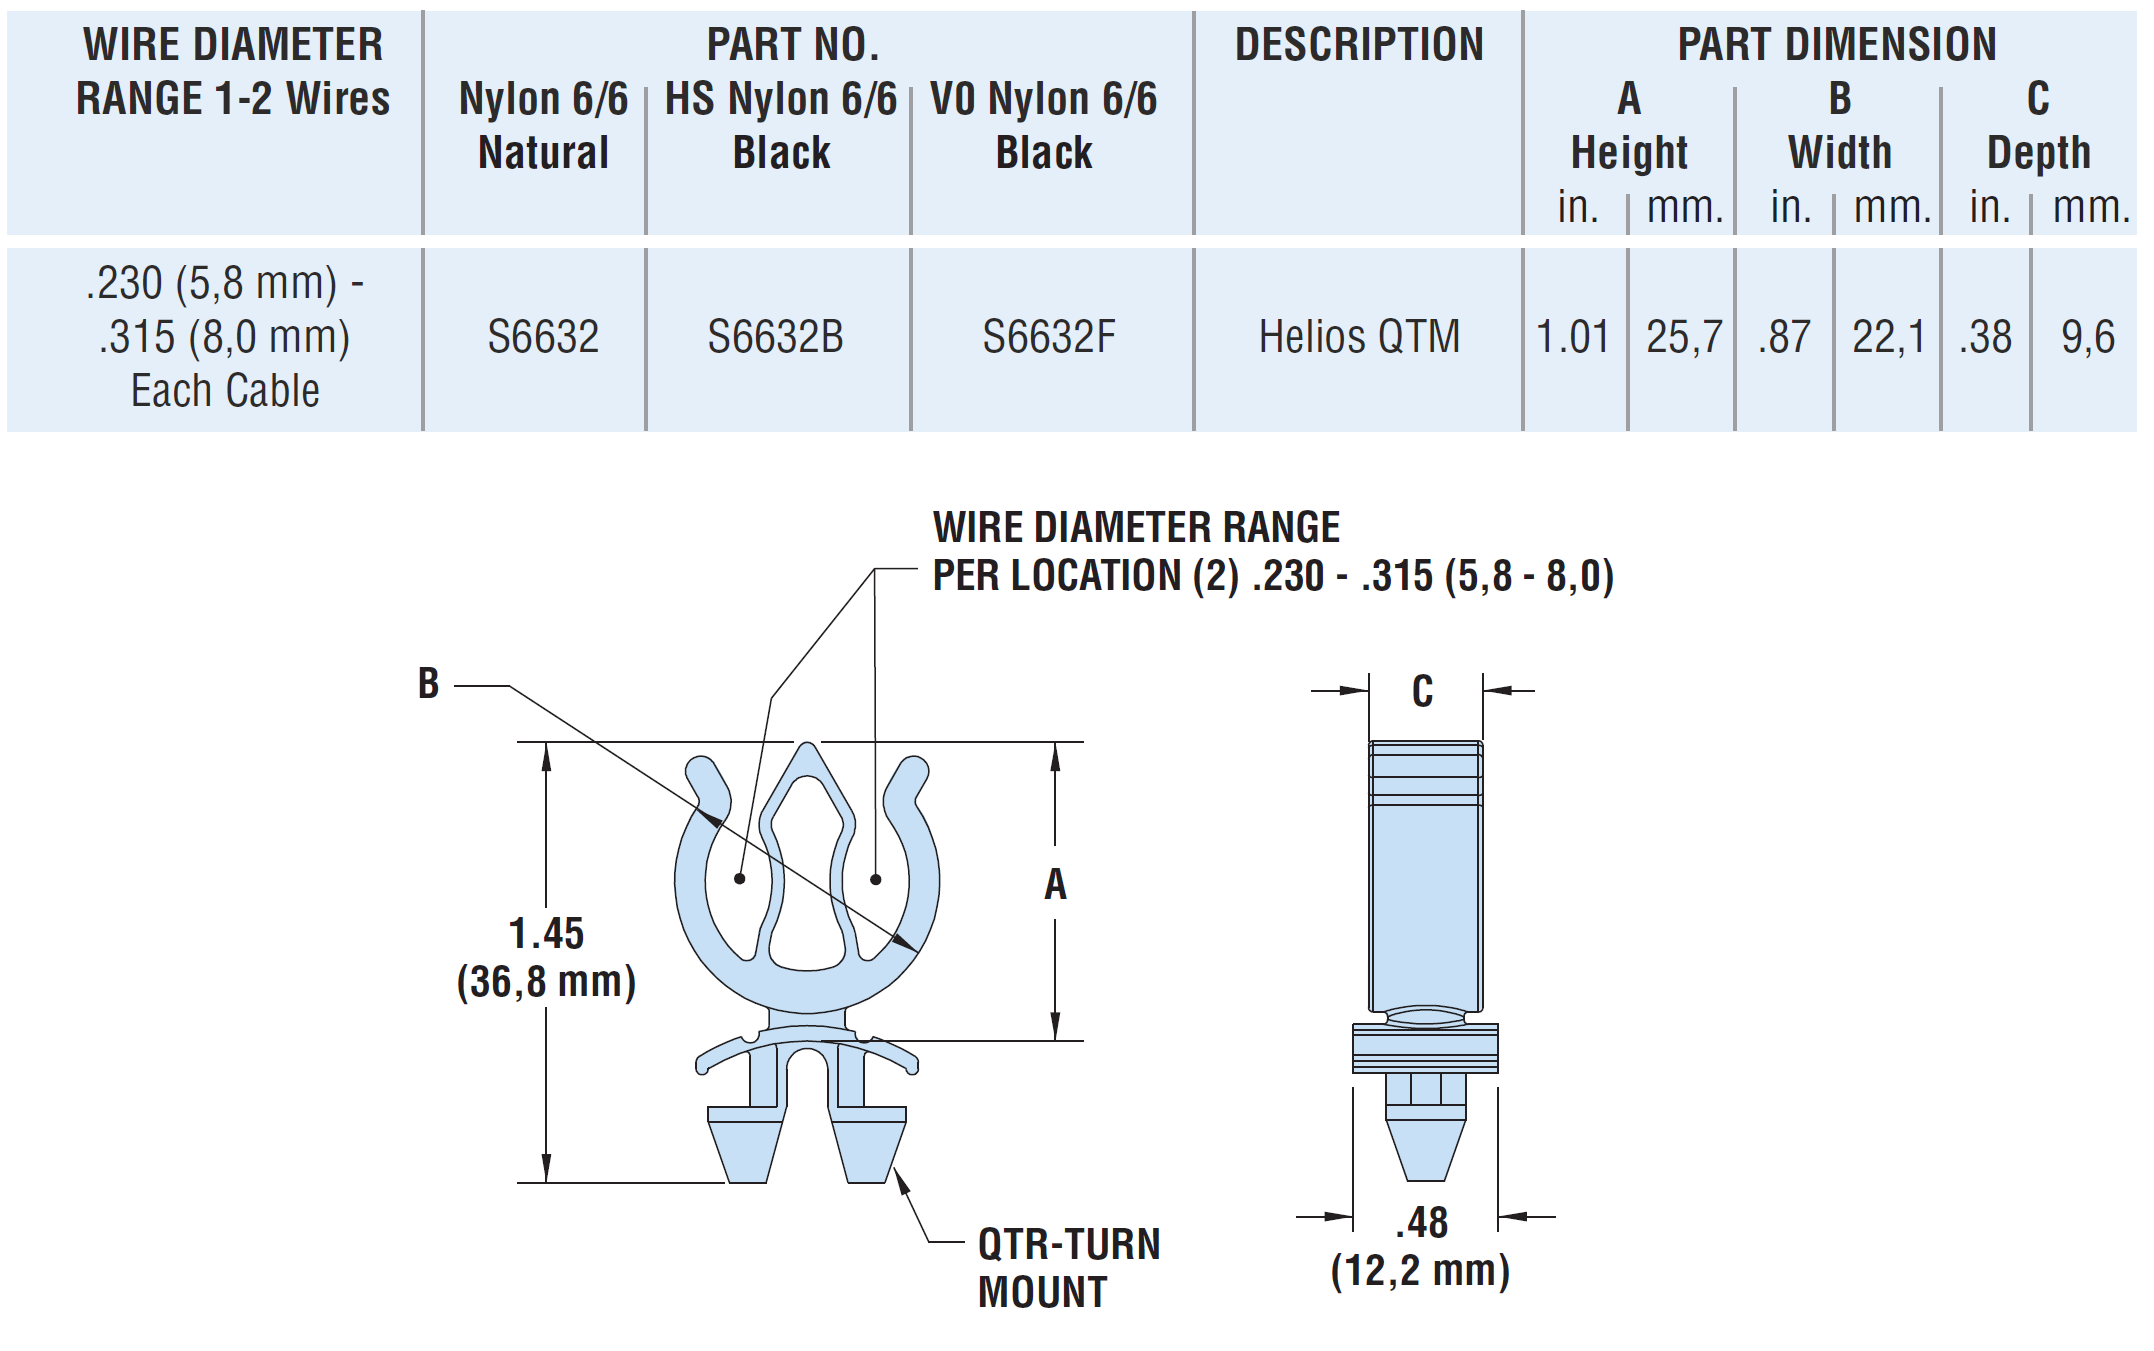 Heyco® Quarter-Turn Mount Wire Clips